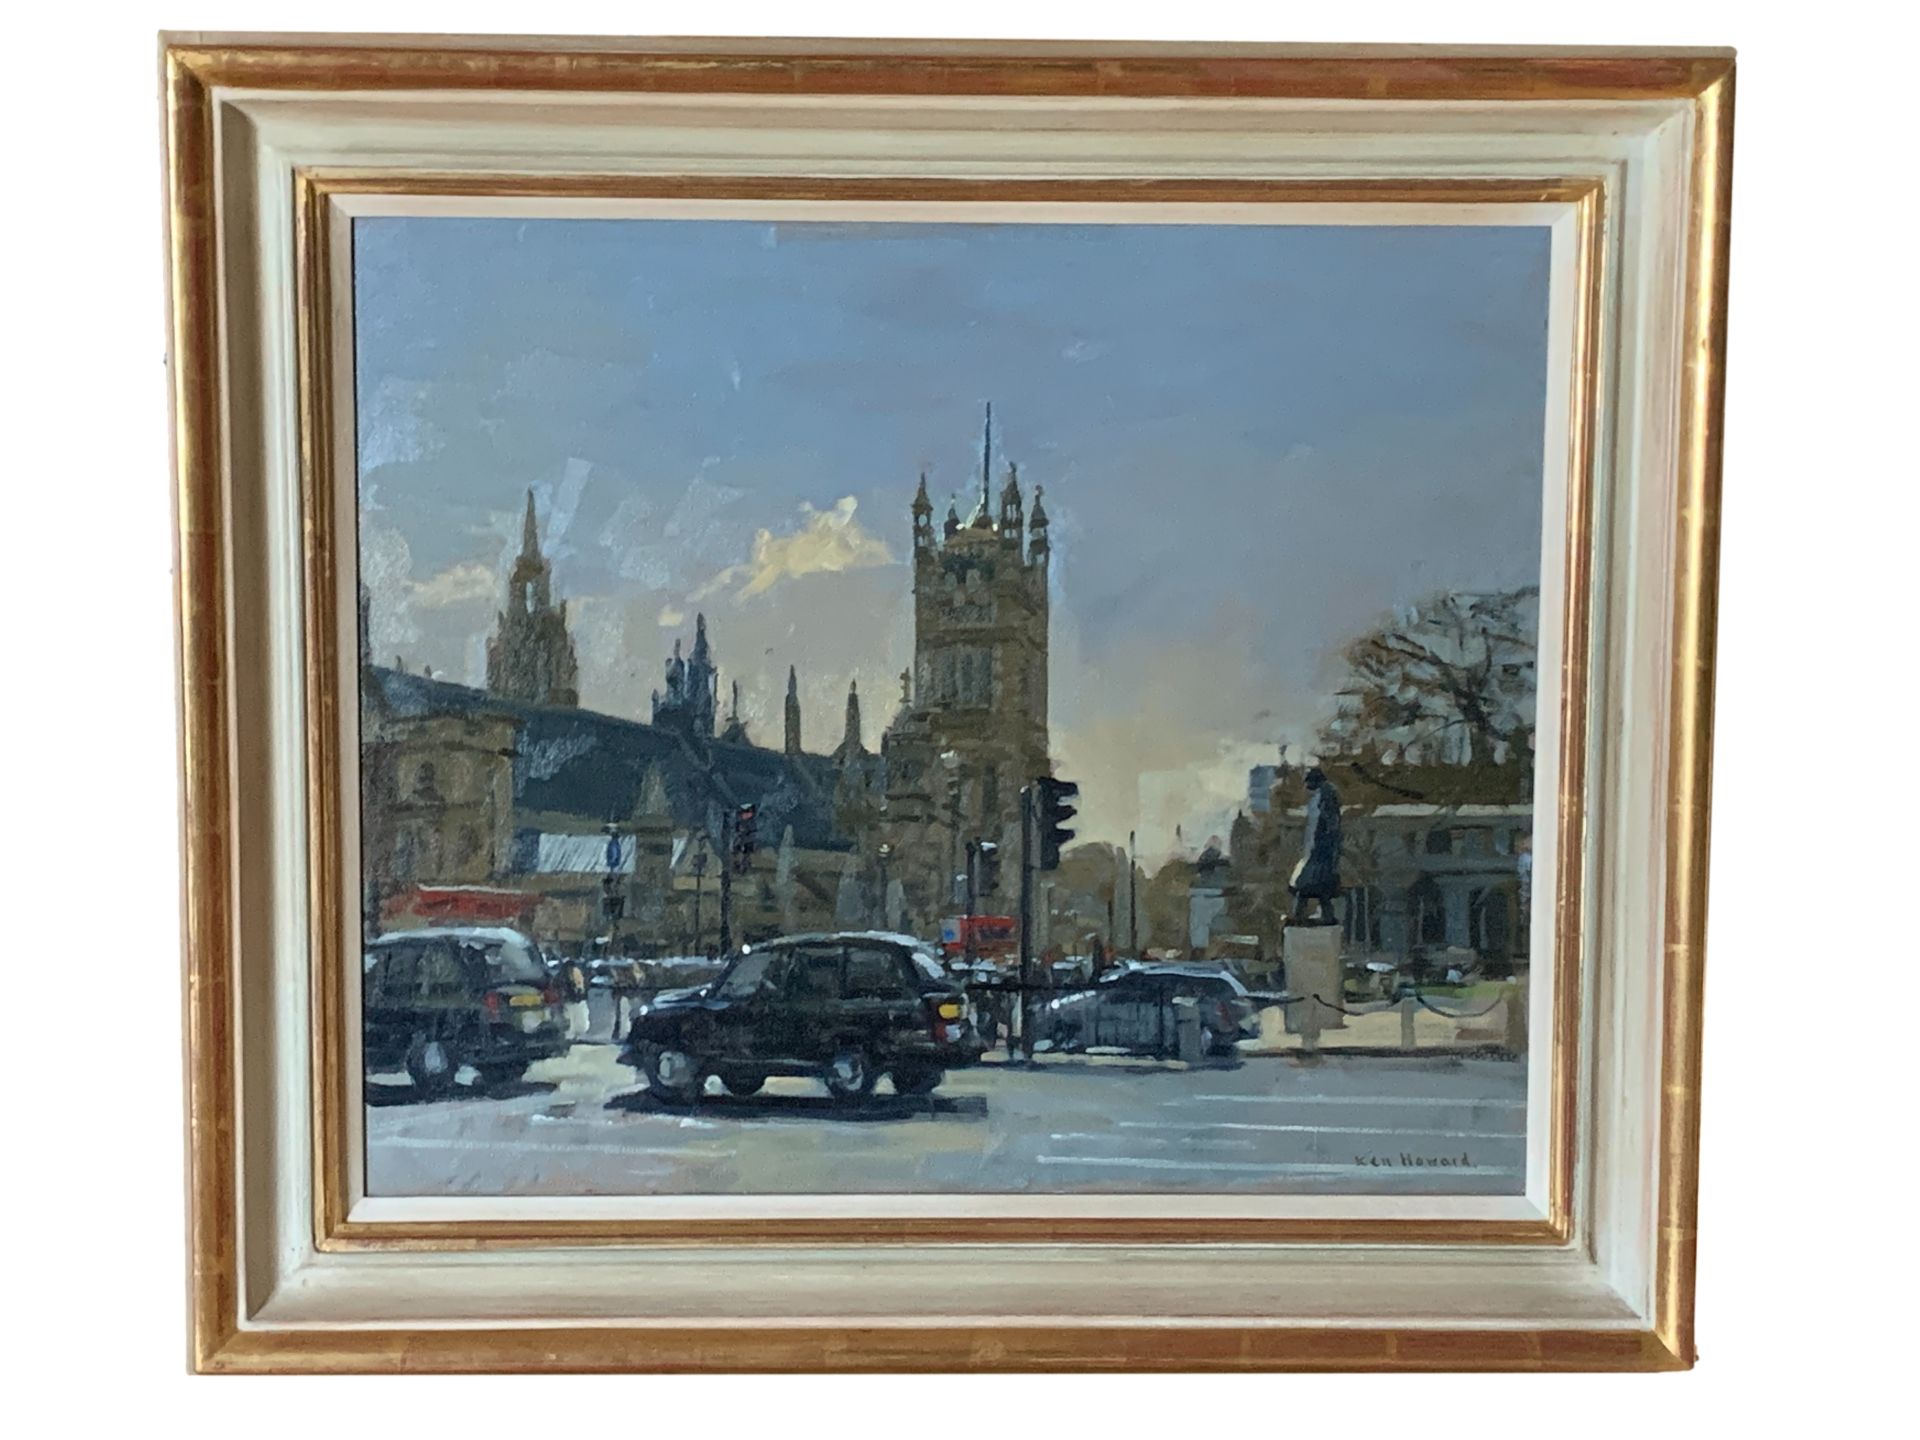 Ken Howard, R.A. Gilt framed oil on canvas of Parliament Square, London